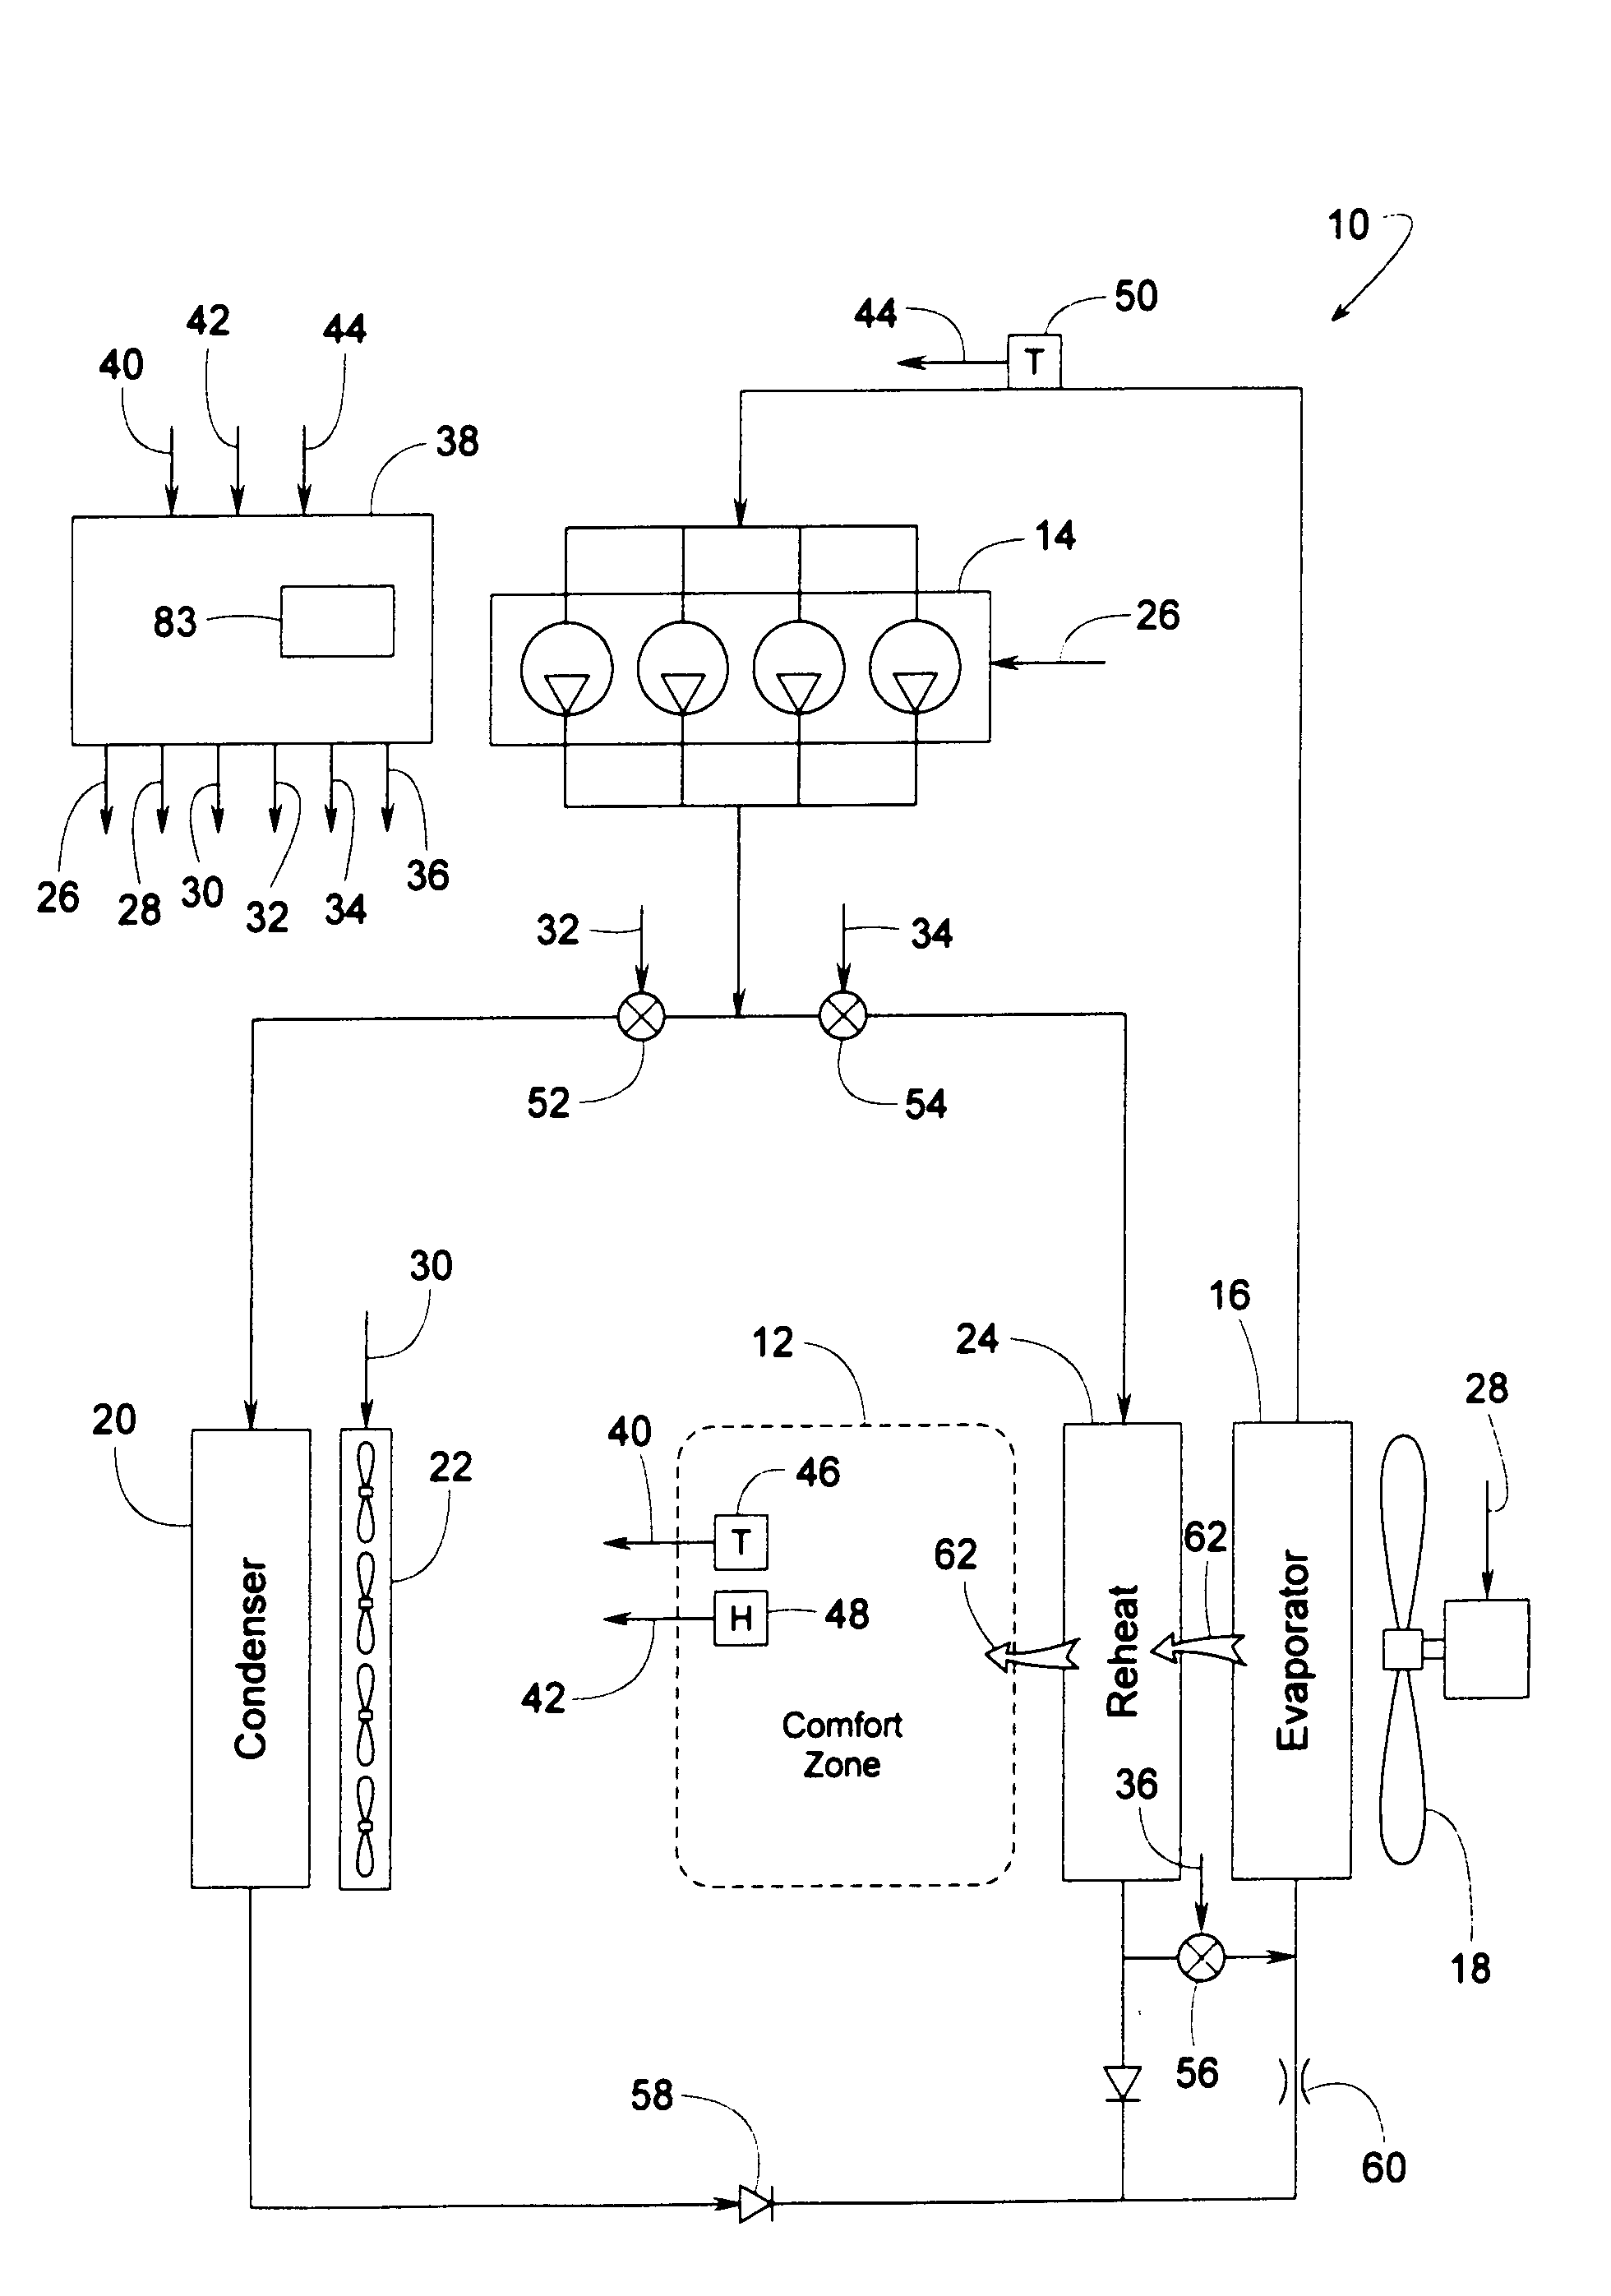 Control scheme for coordinating variable capacity components of a refrigerant system